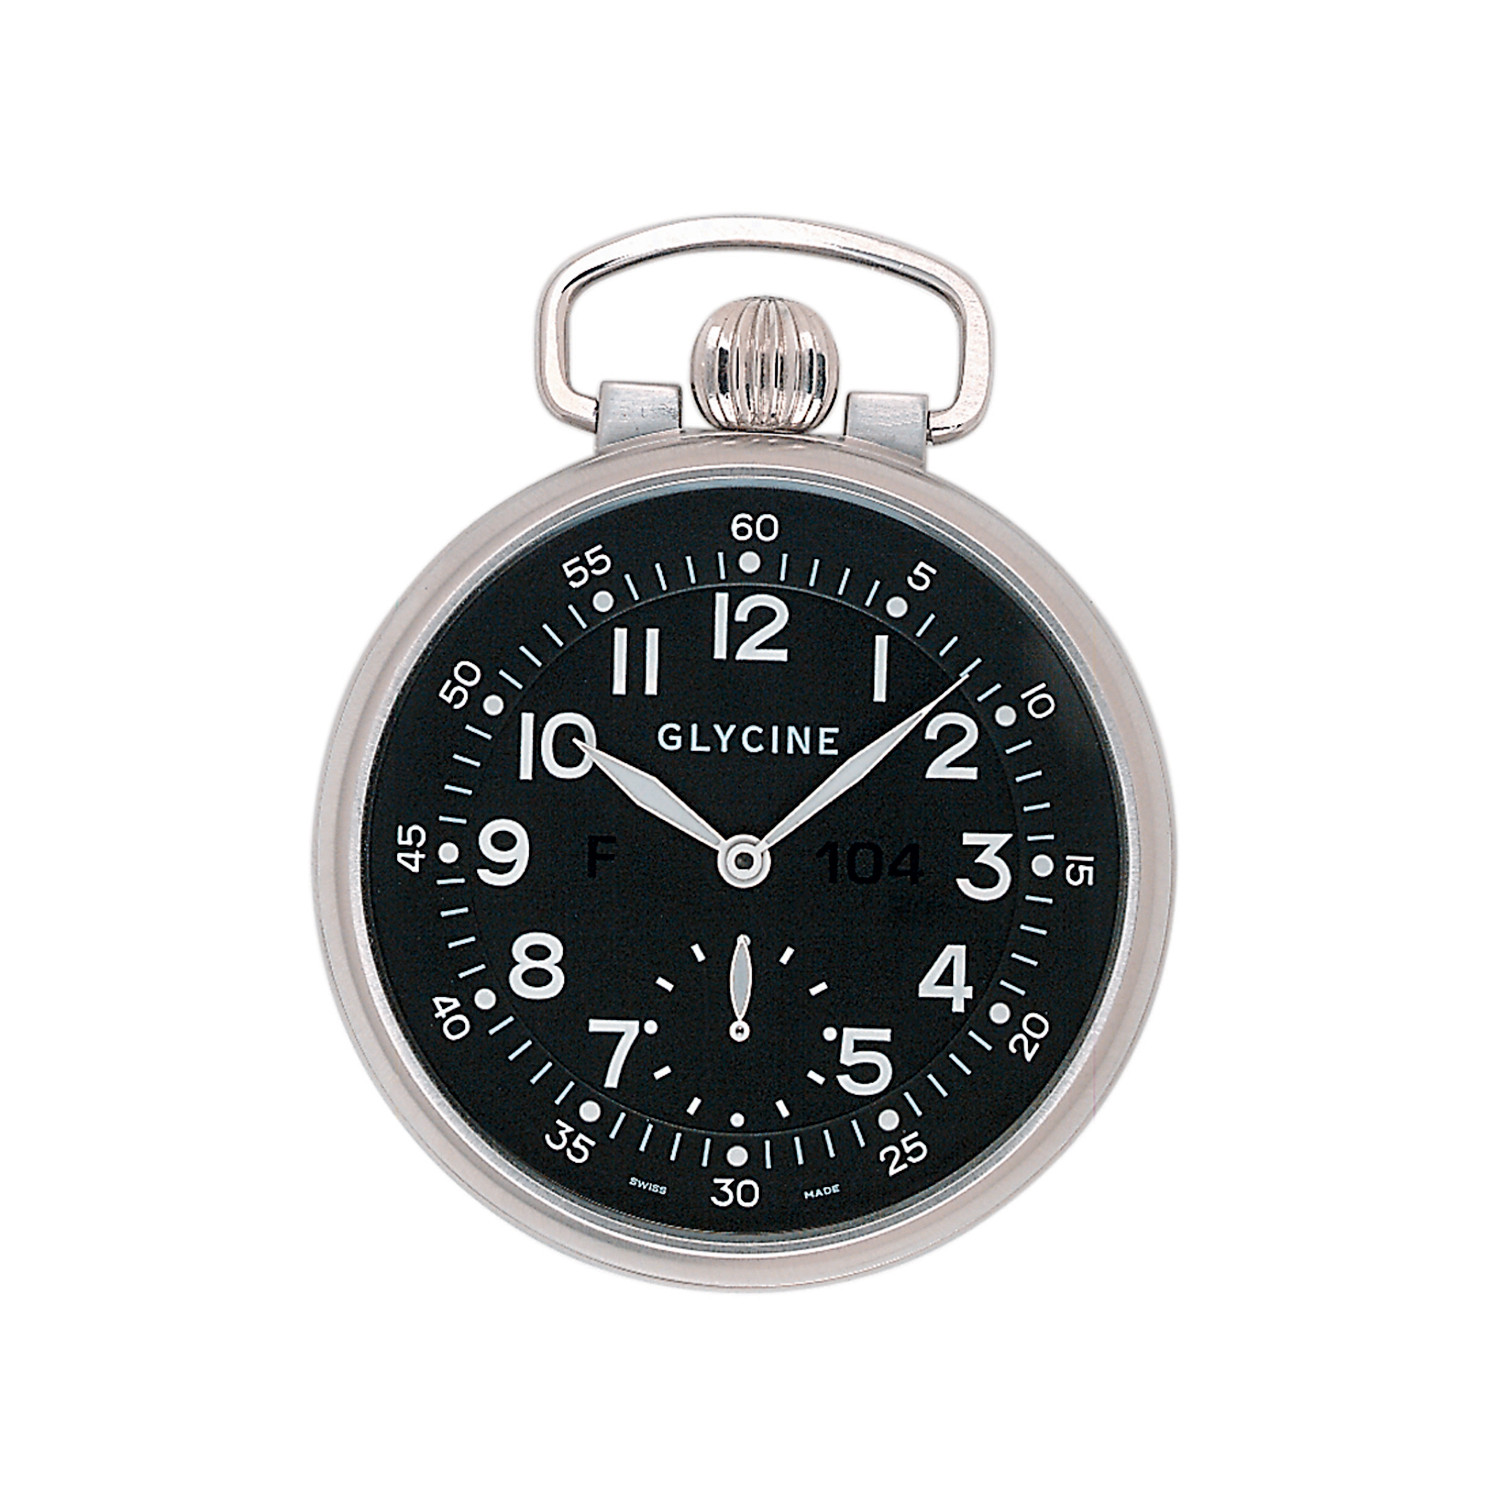 modern pocket watches for sale